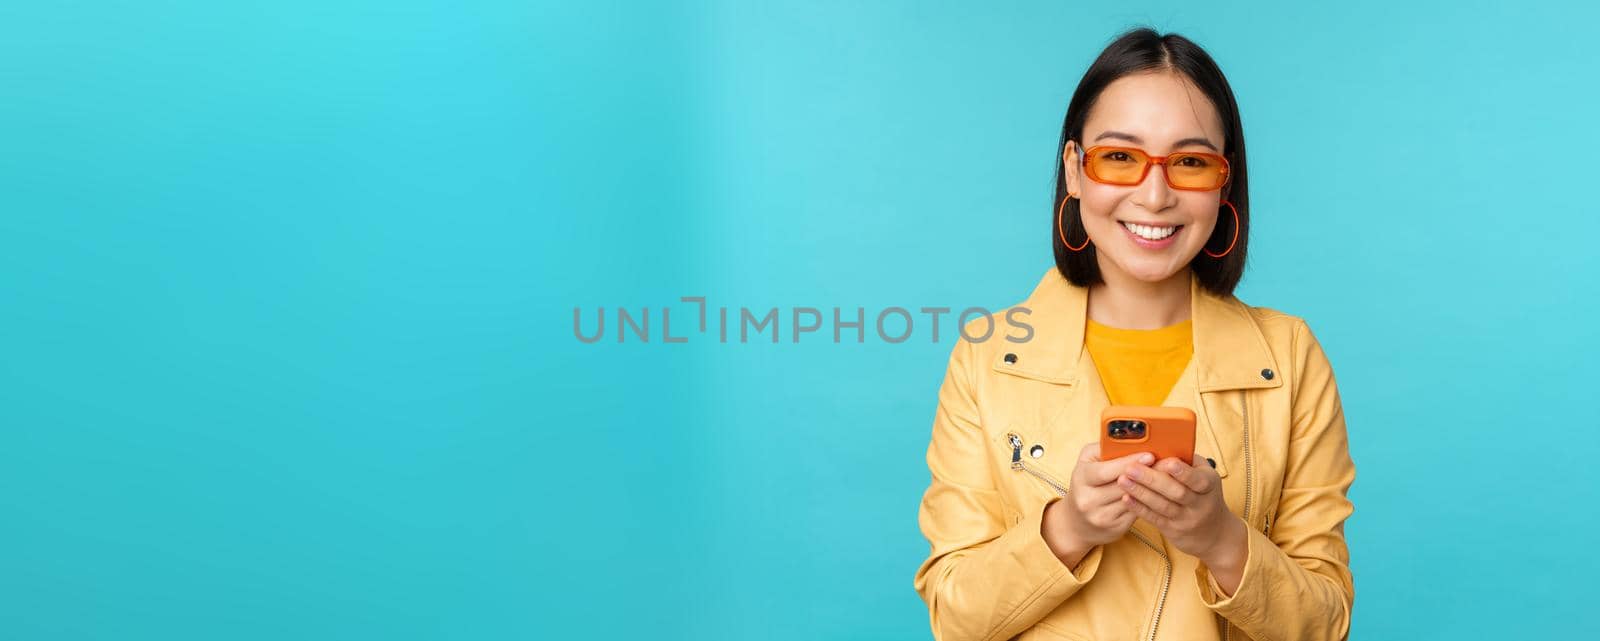 Smiling asian girl in sunglasses, using smartphone app, holding mobile phone, standing over blue background. Copy space